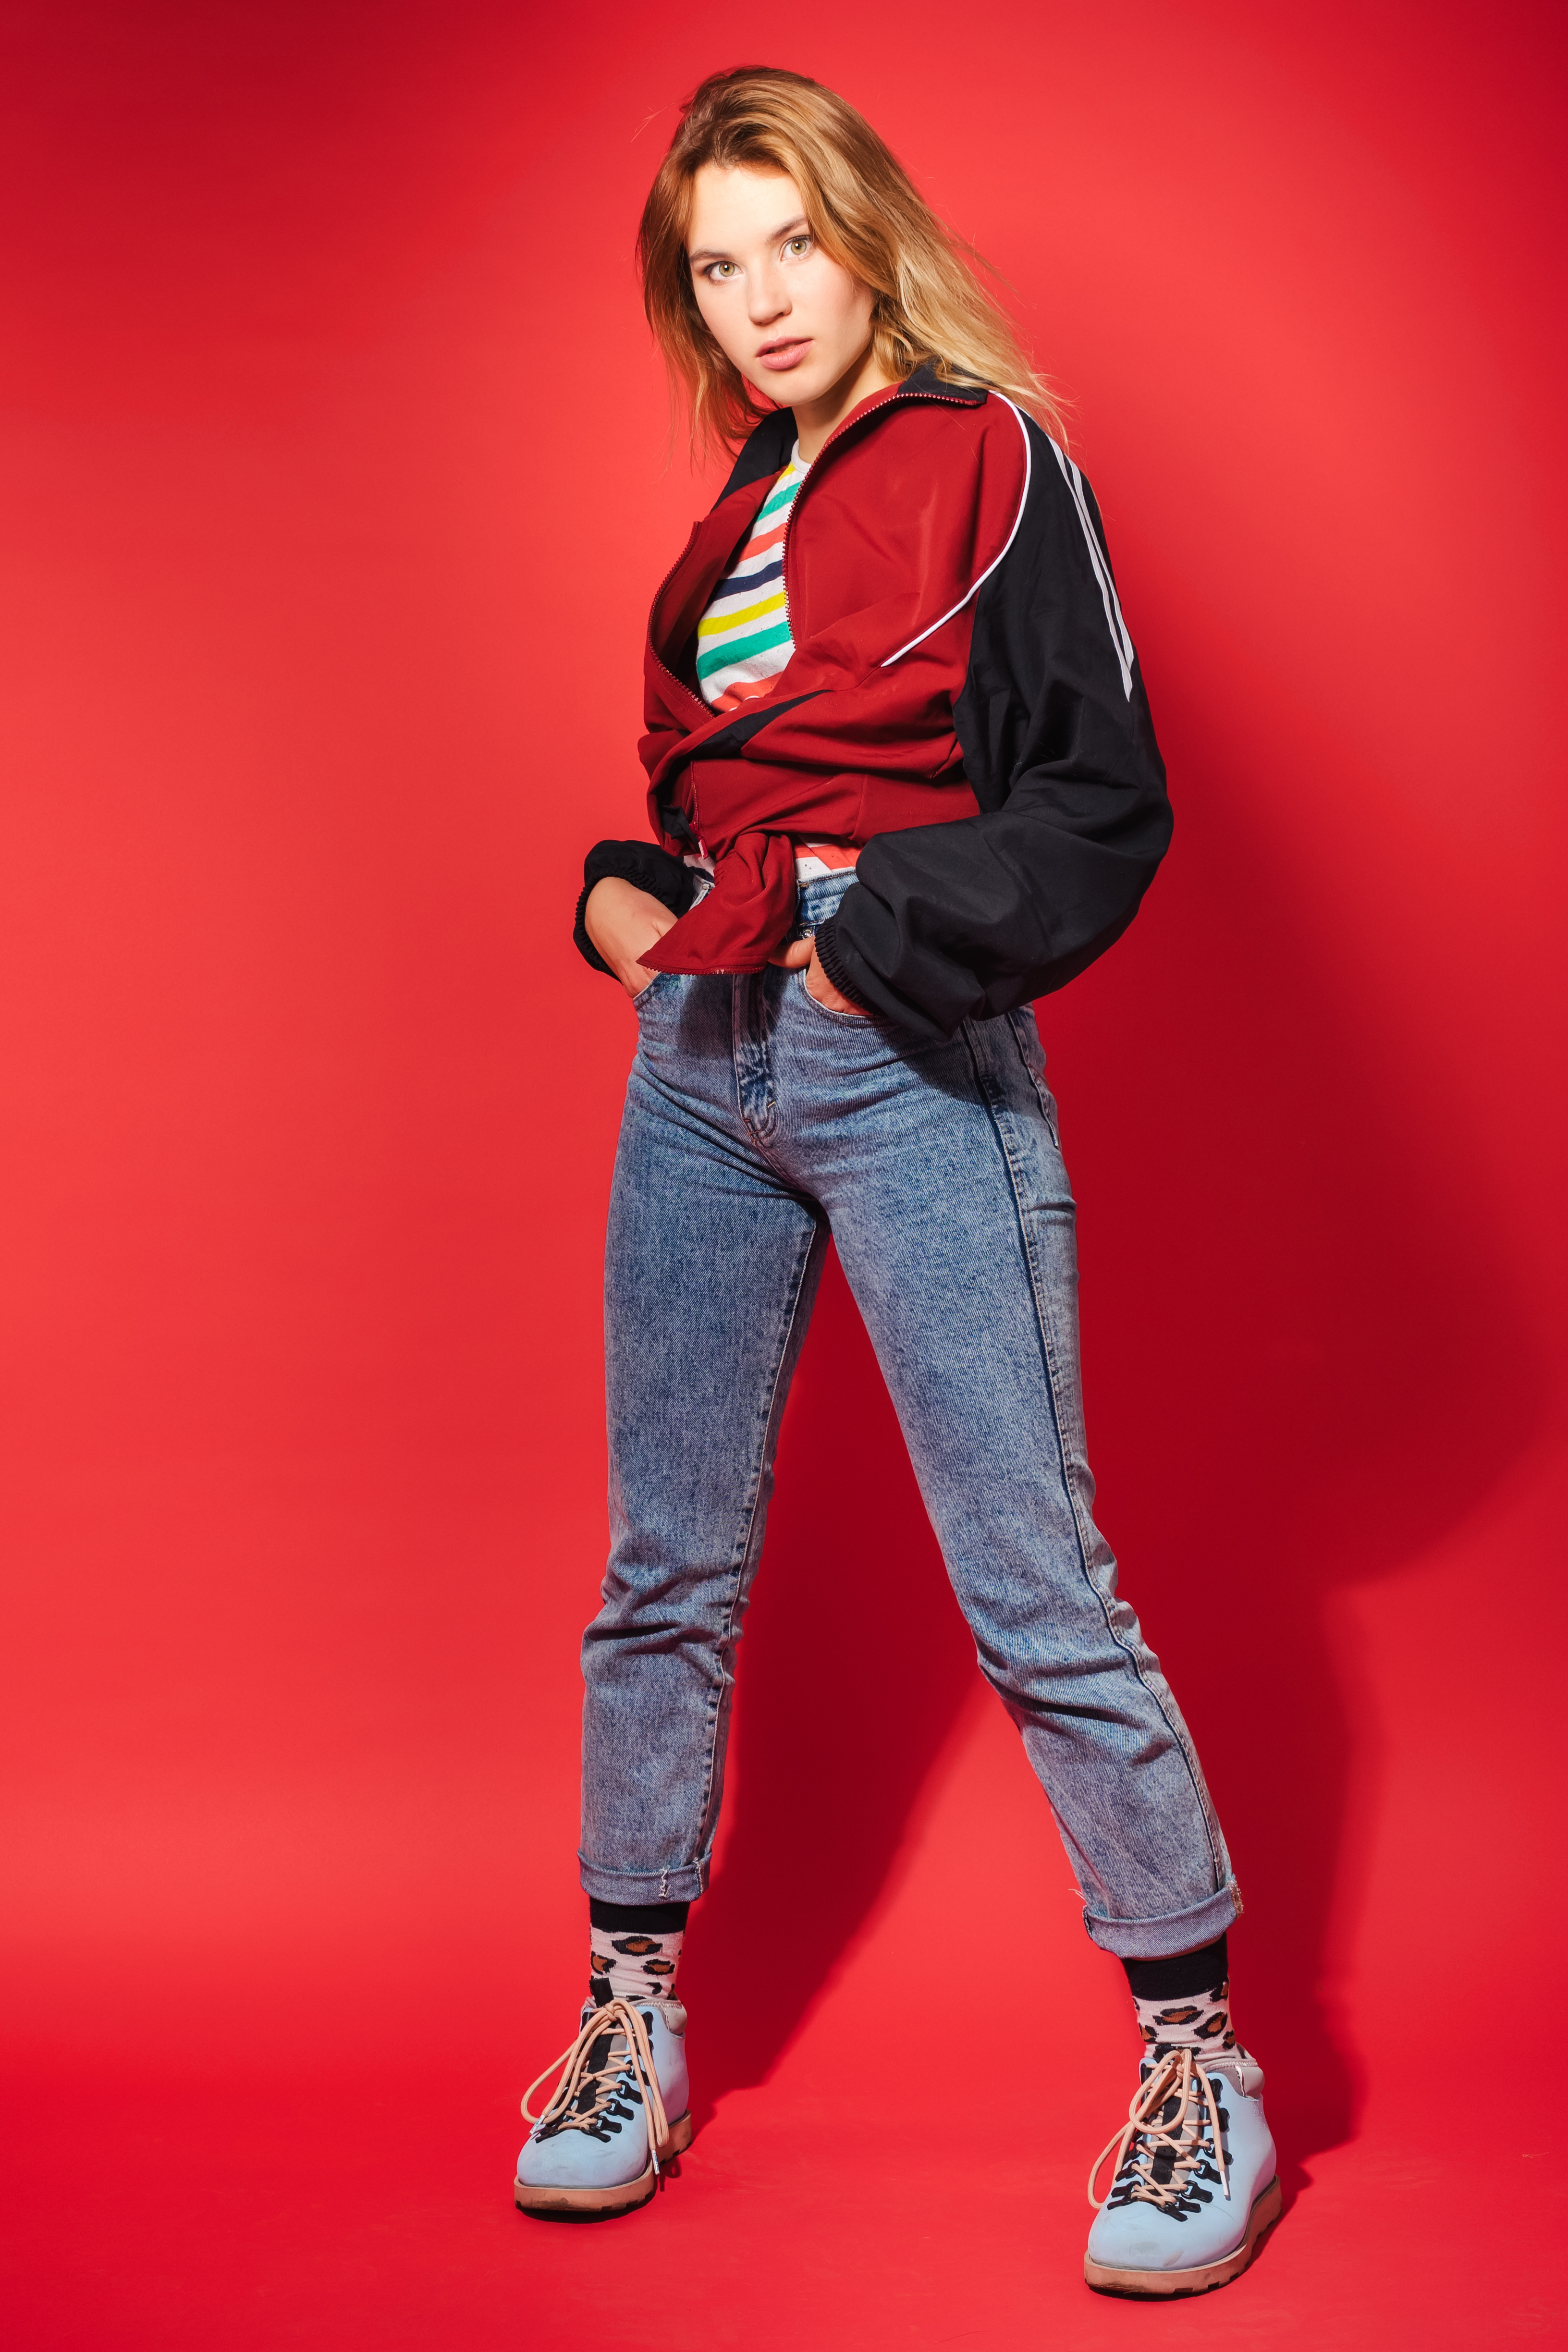 A woman styling her jeans with a red sports jacket and colorful striped tee | Source: Getty Images